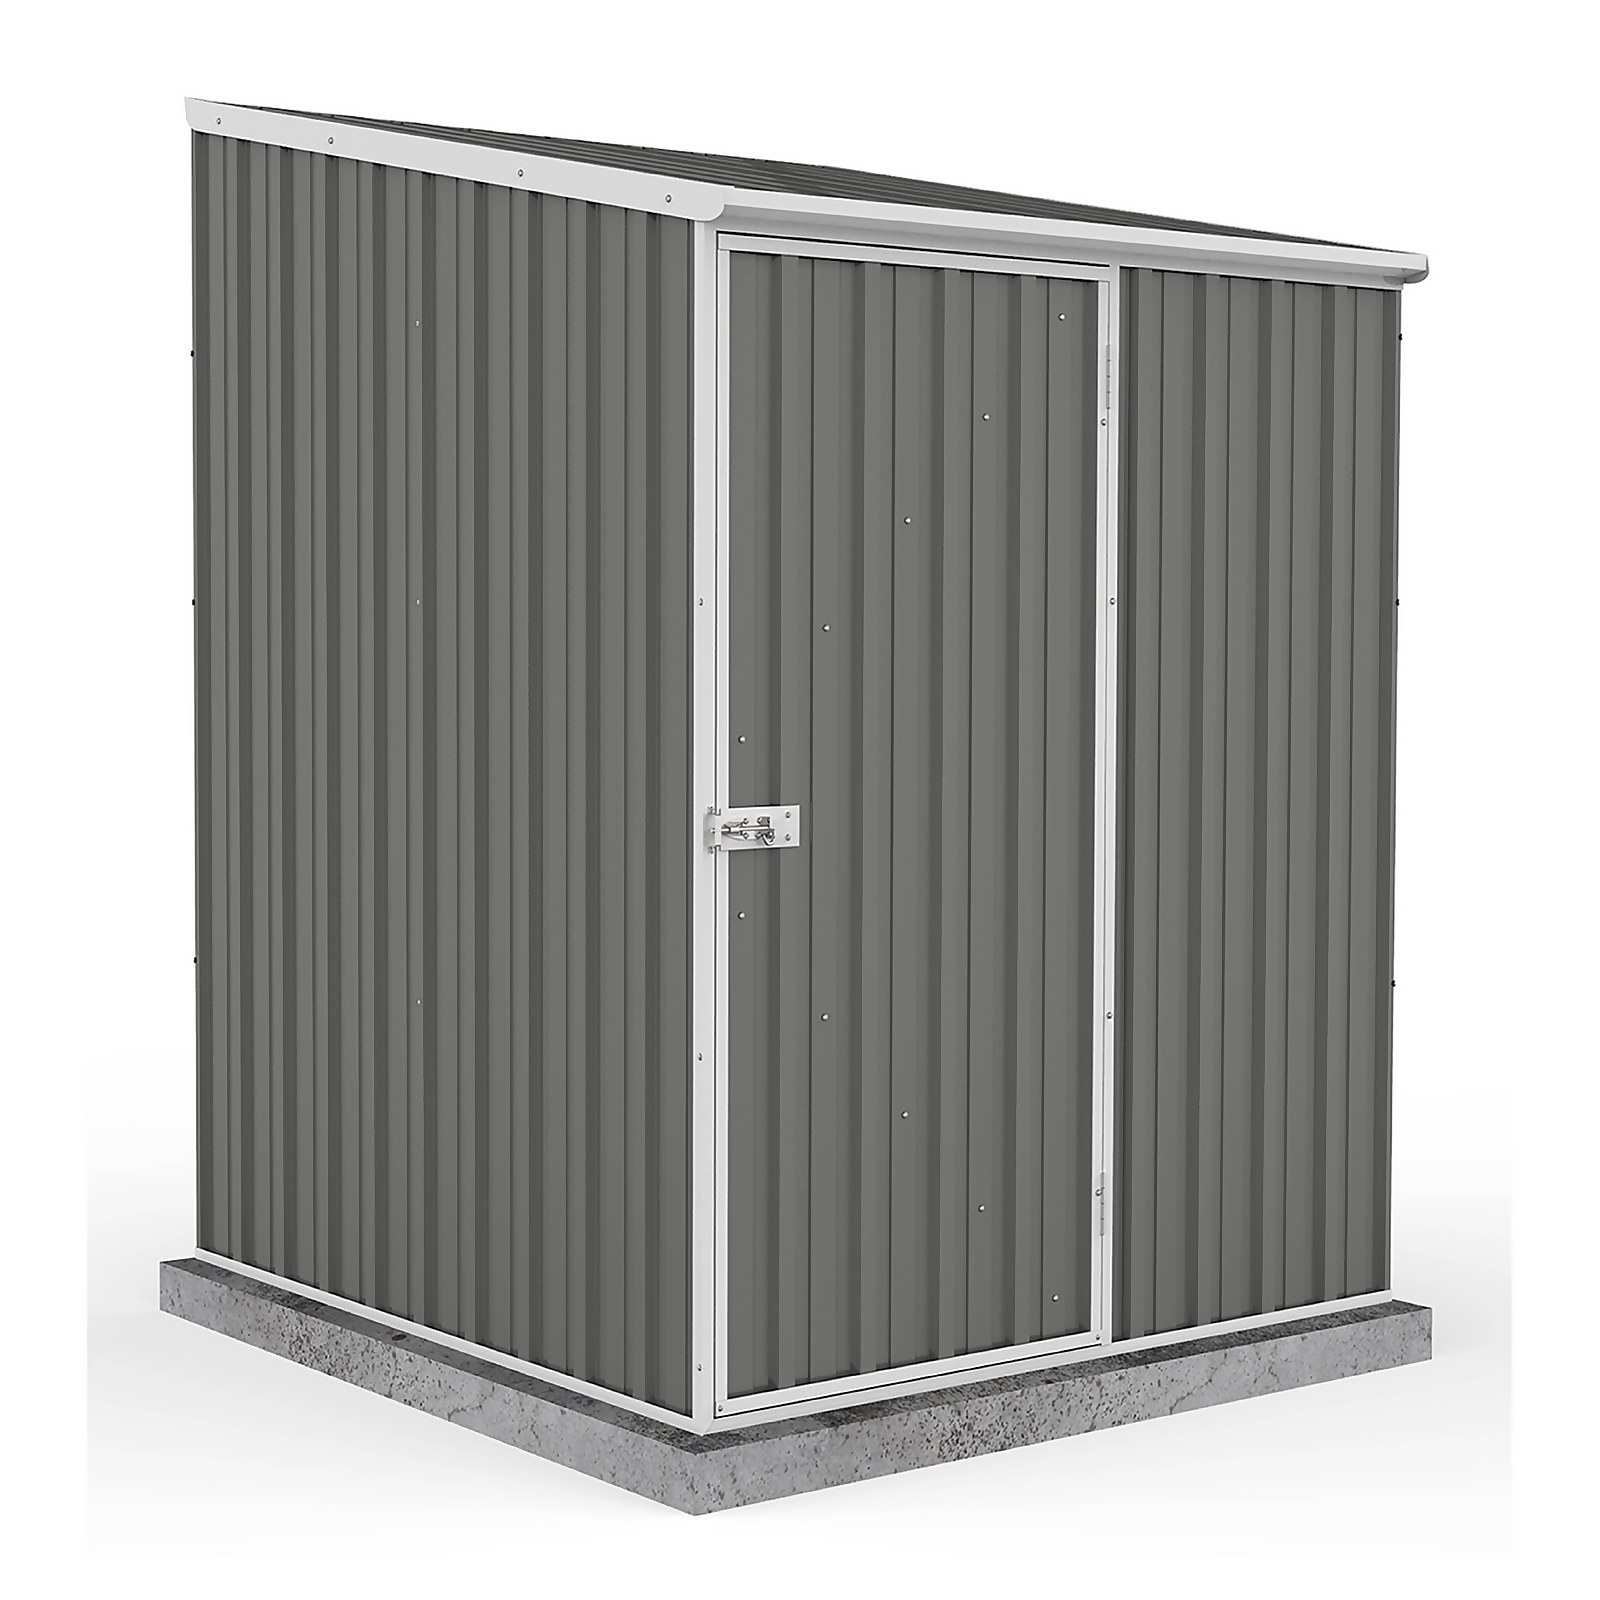 Absco 5 x 5ft Space Saver Metal Pent Shed - Grey